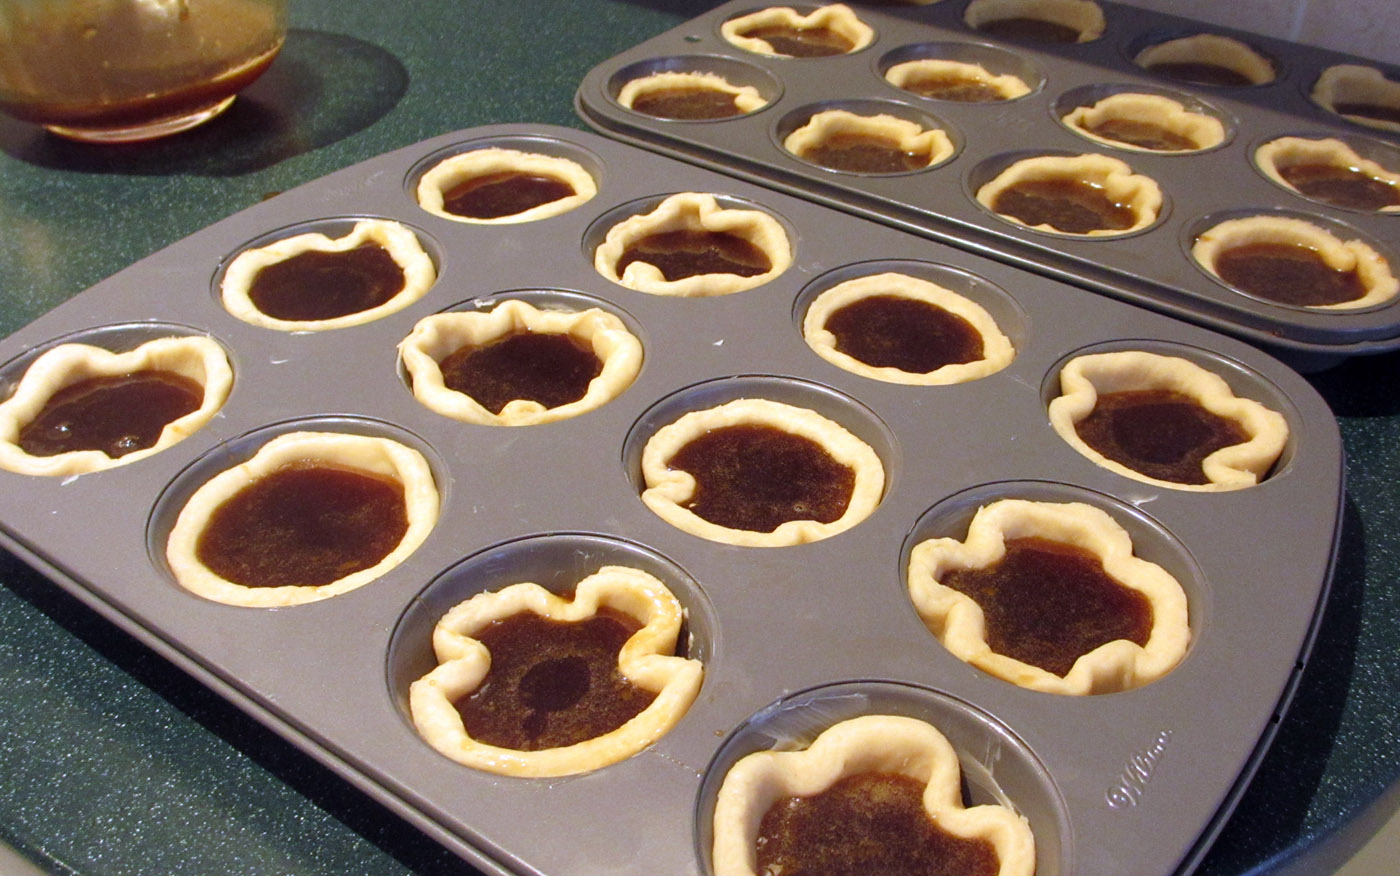 Butter tarts with filling before baking